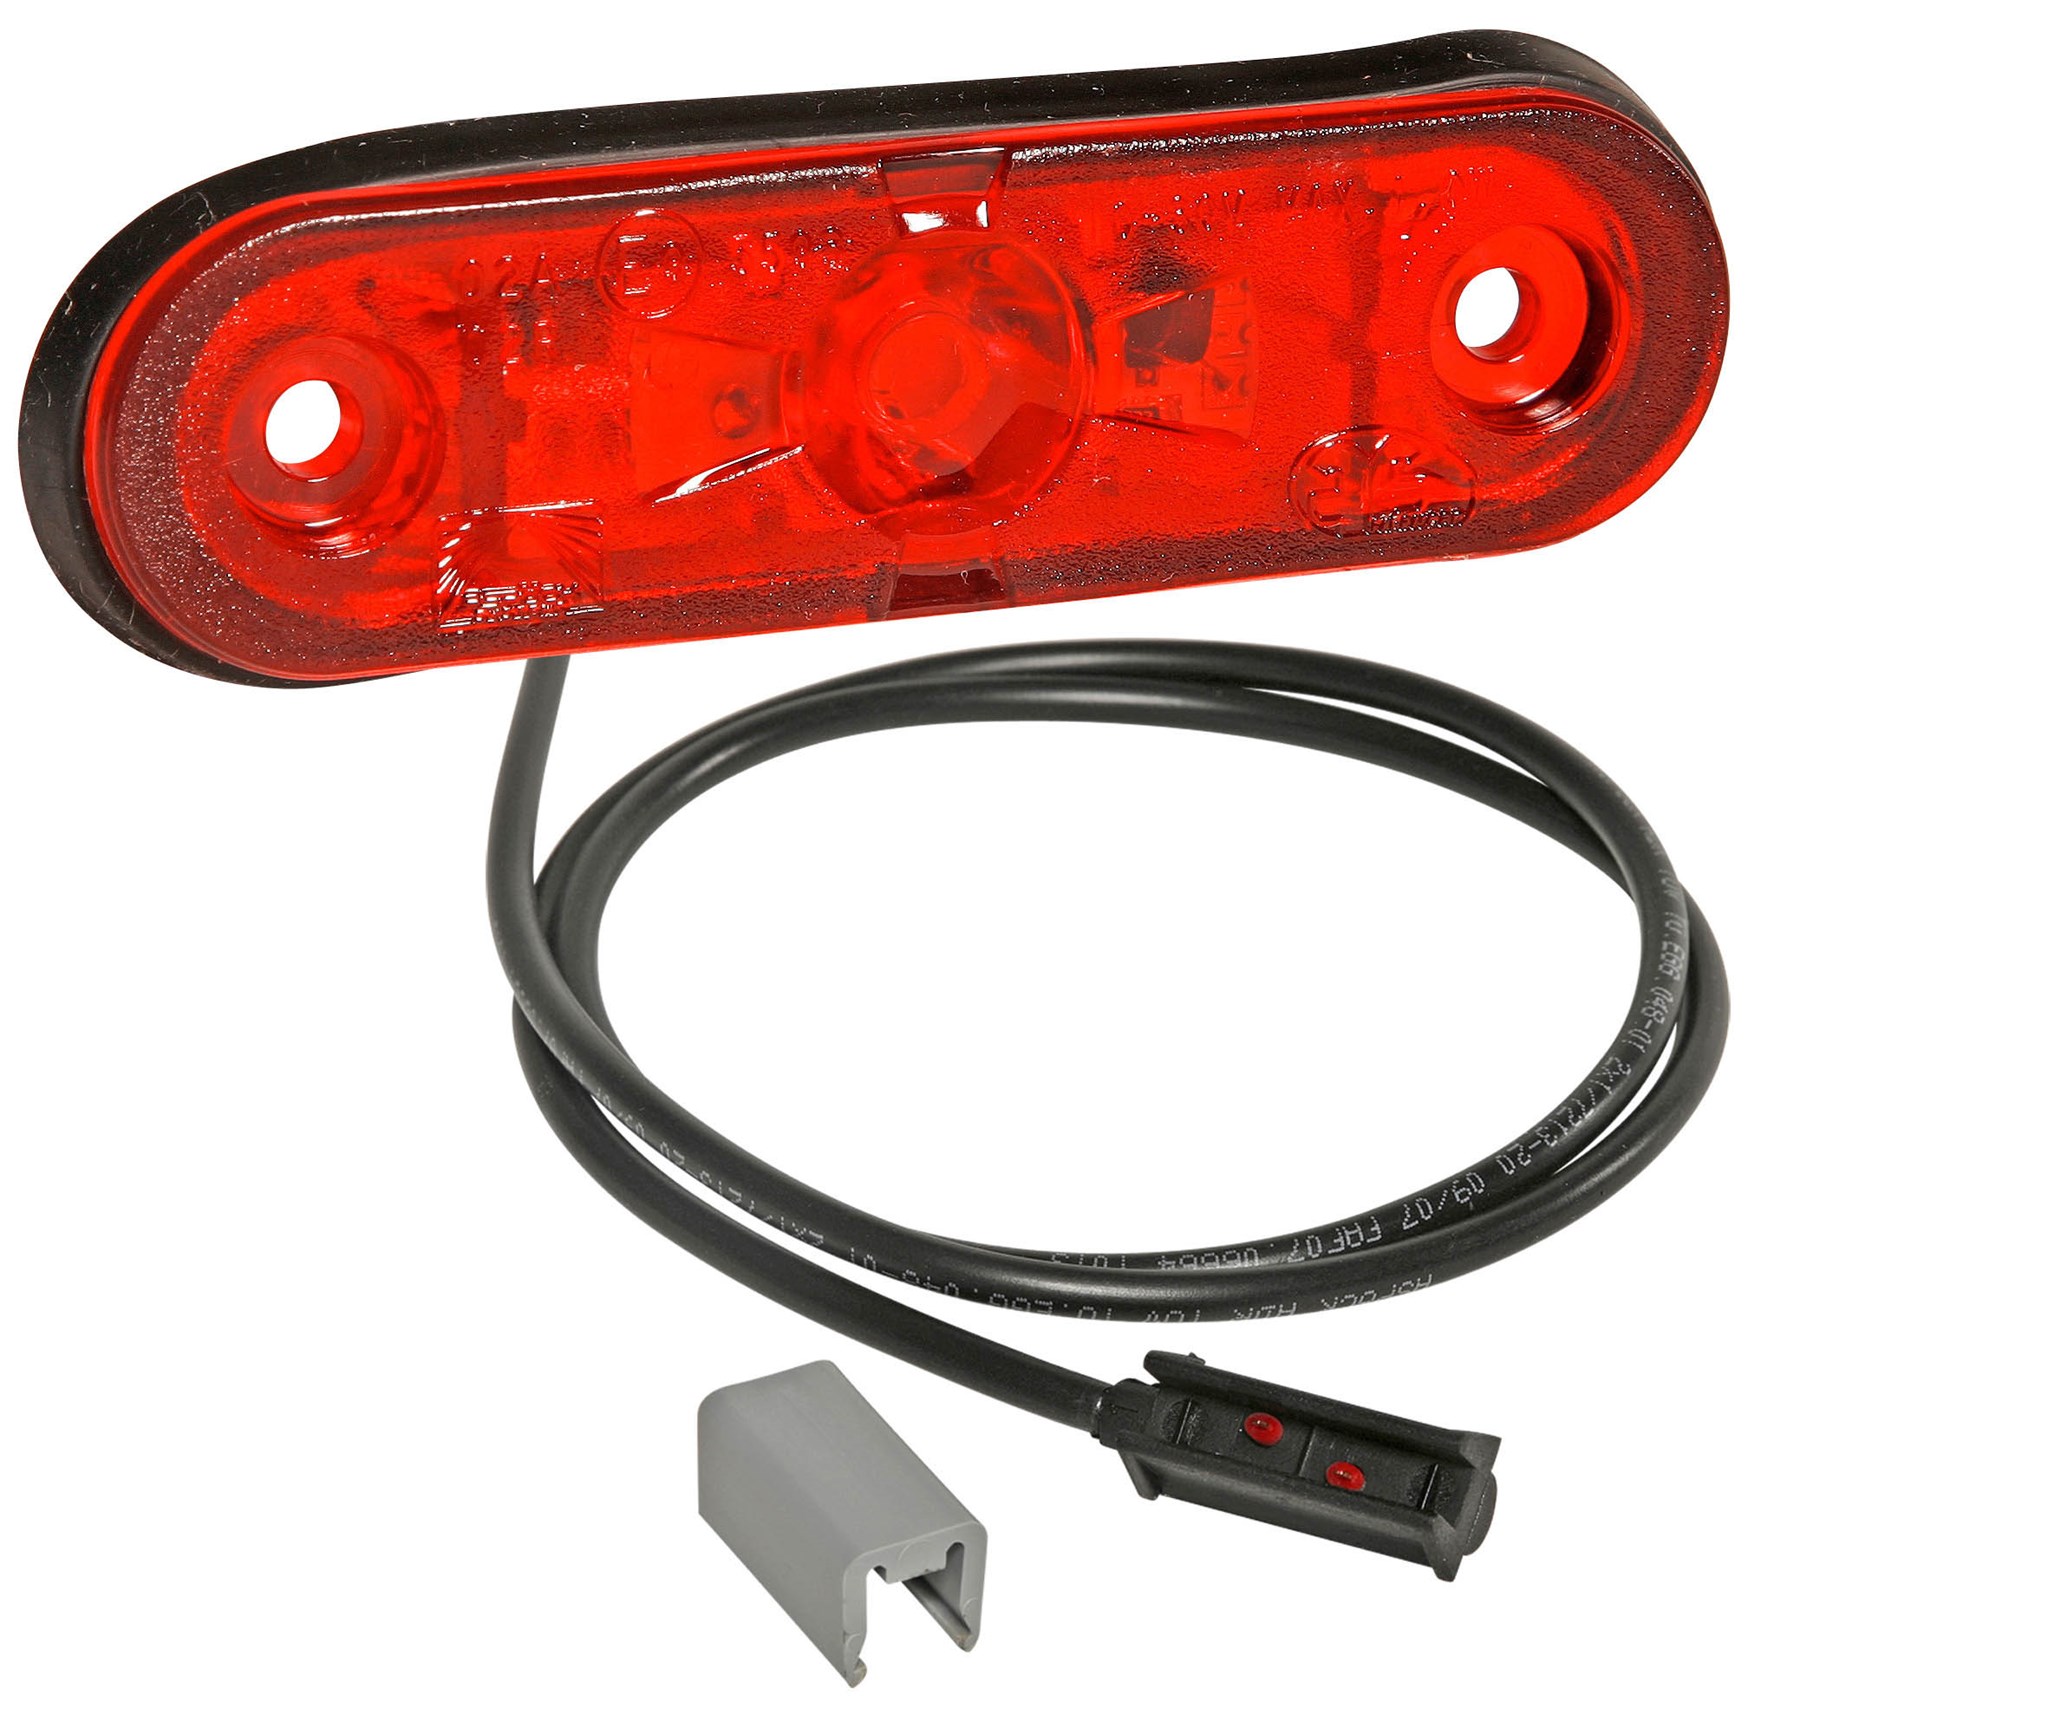 Immagine di Positionsleuchte 31-7204-017 Aspöck Posipoint II rot LED P&R 1500mm